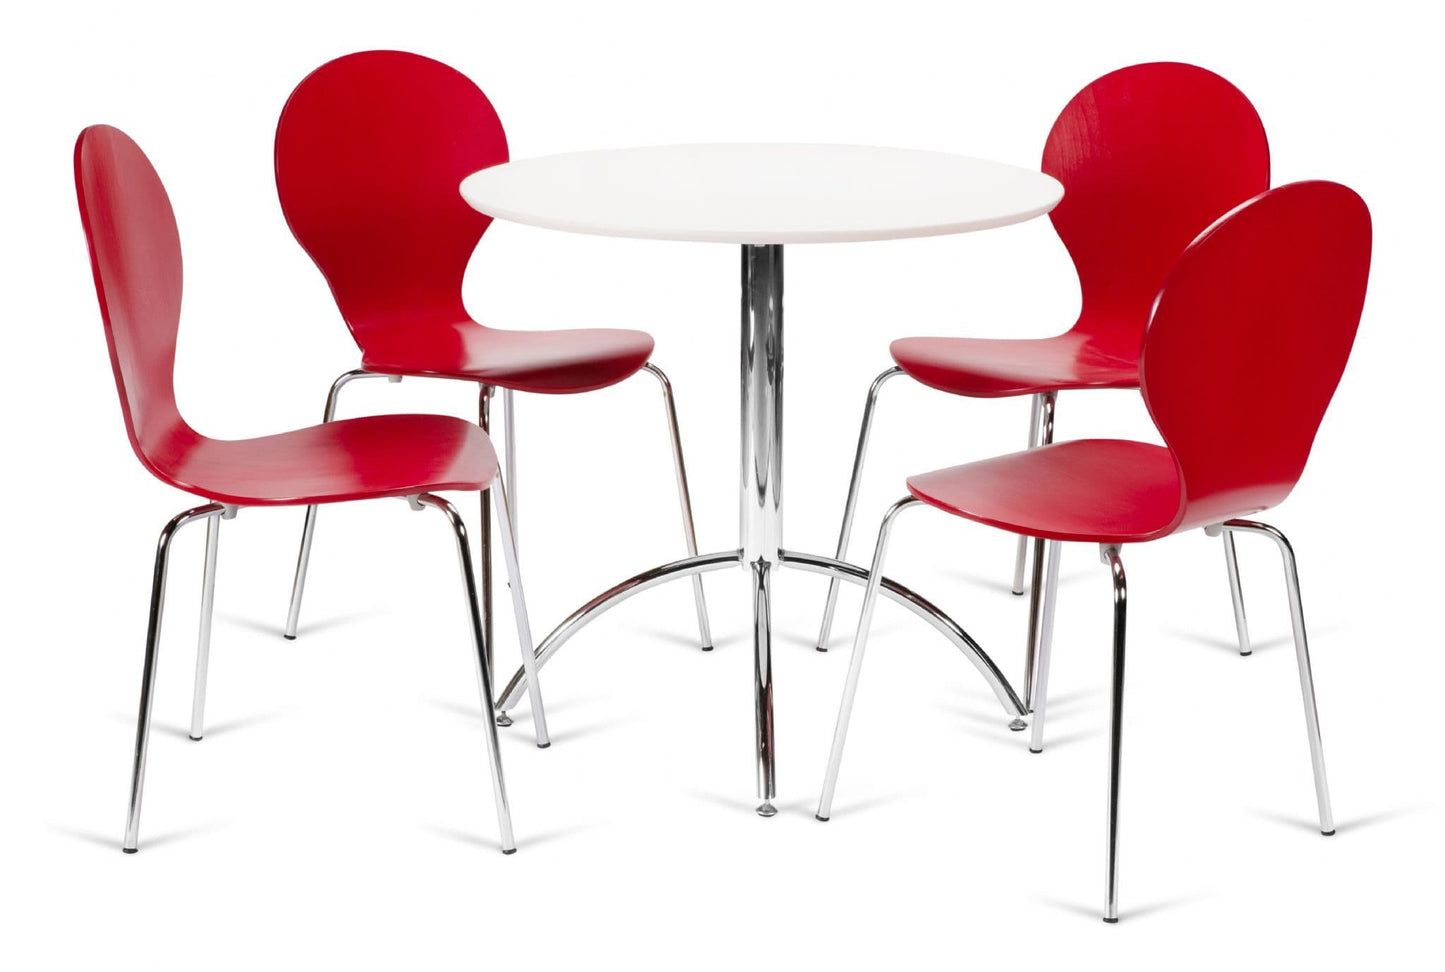 Kimberley Dining Set White Table & 4 Red Chairs